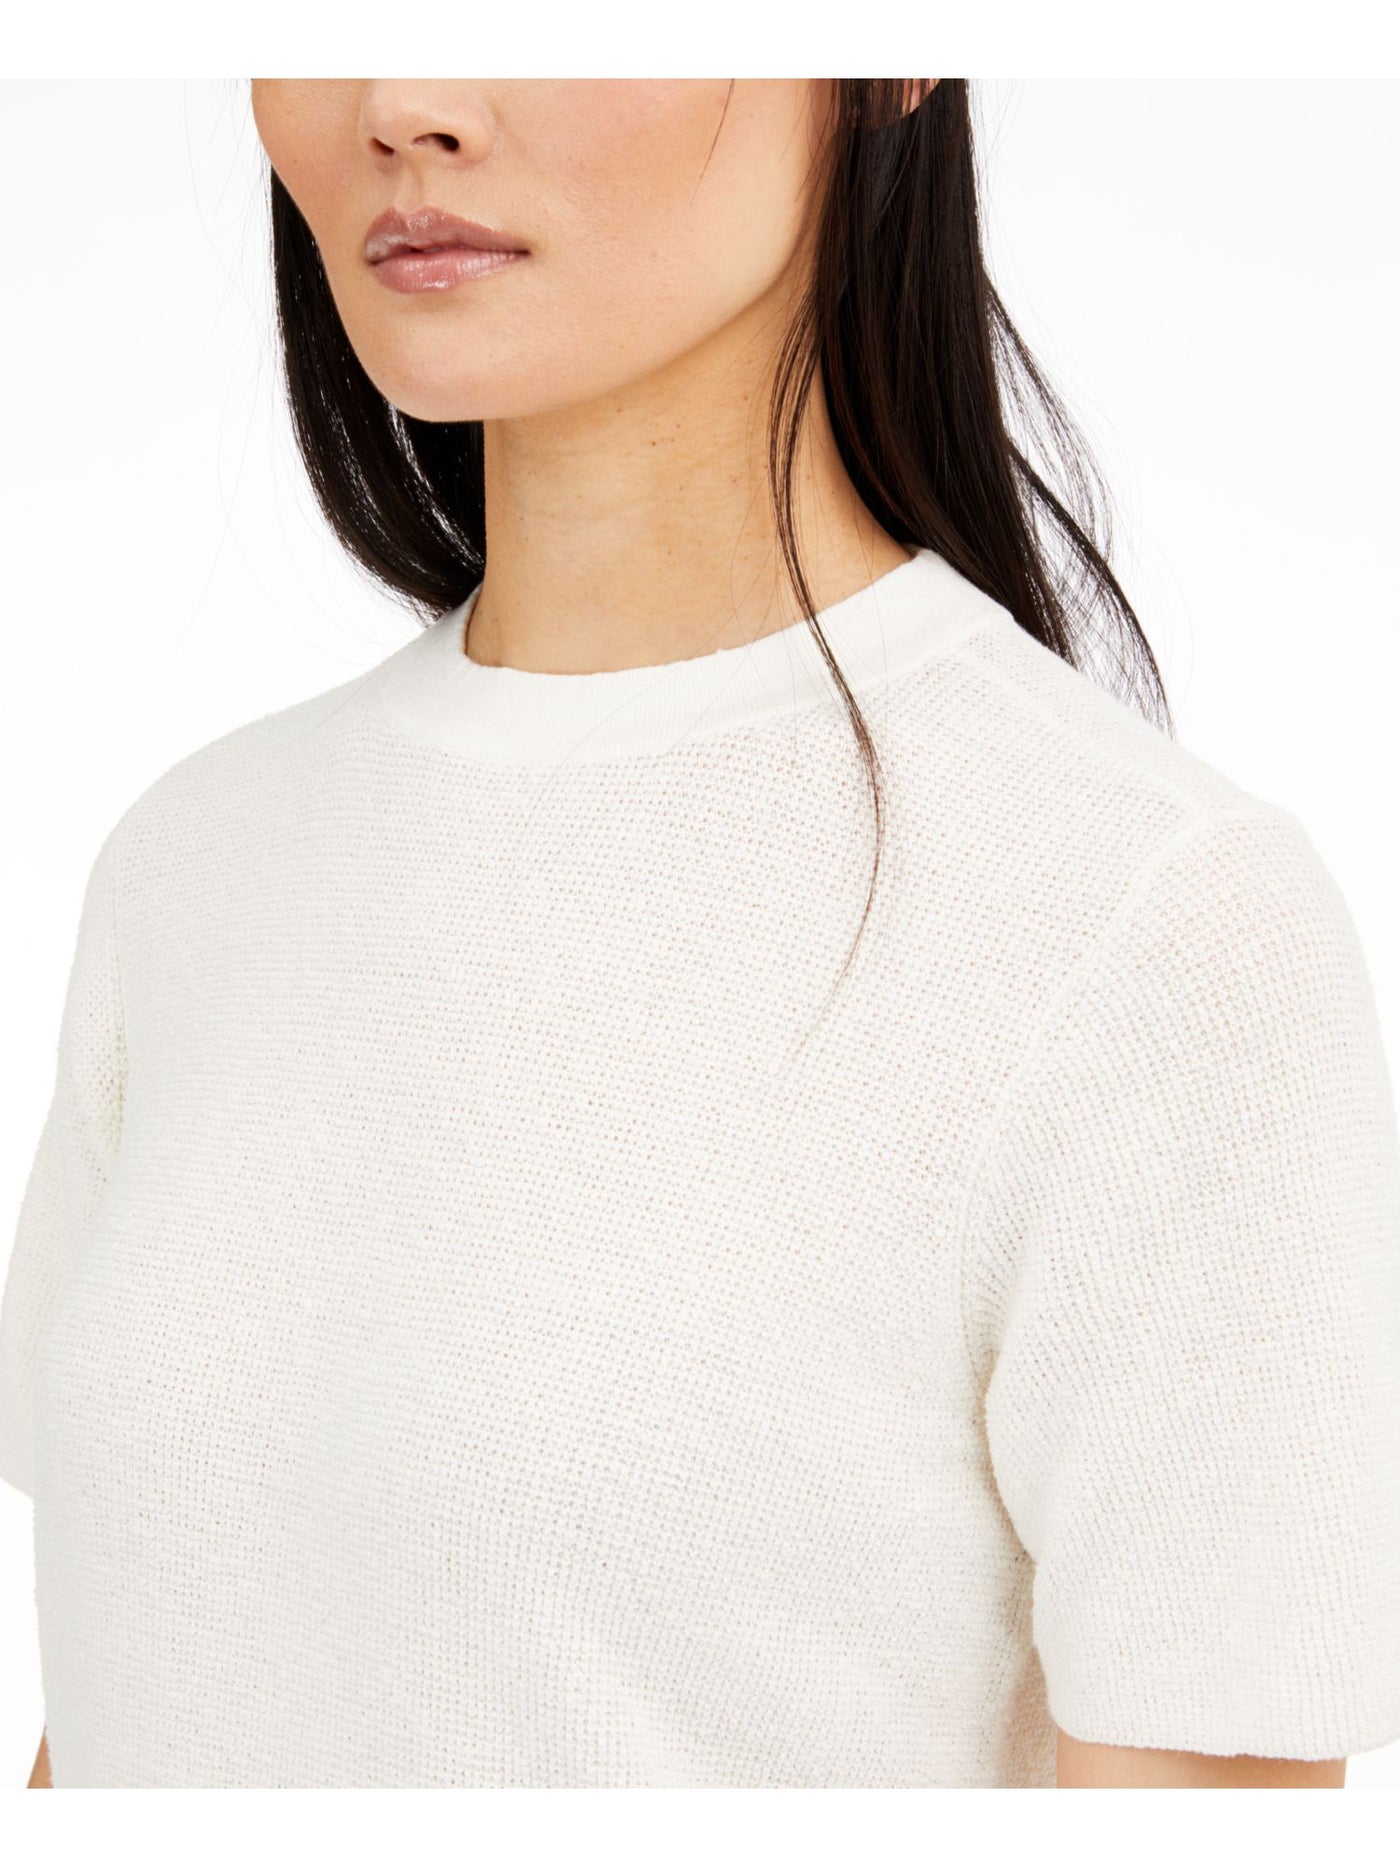 EILEEN FISHER Womens Ivory Short Sleeve Crew Neck Sweater L